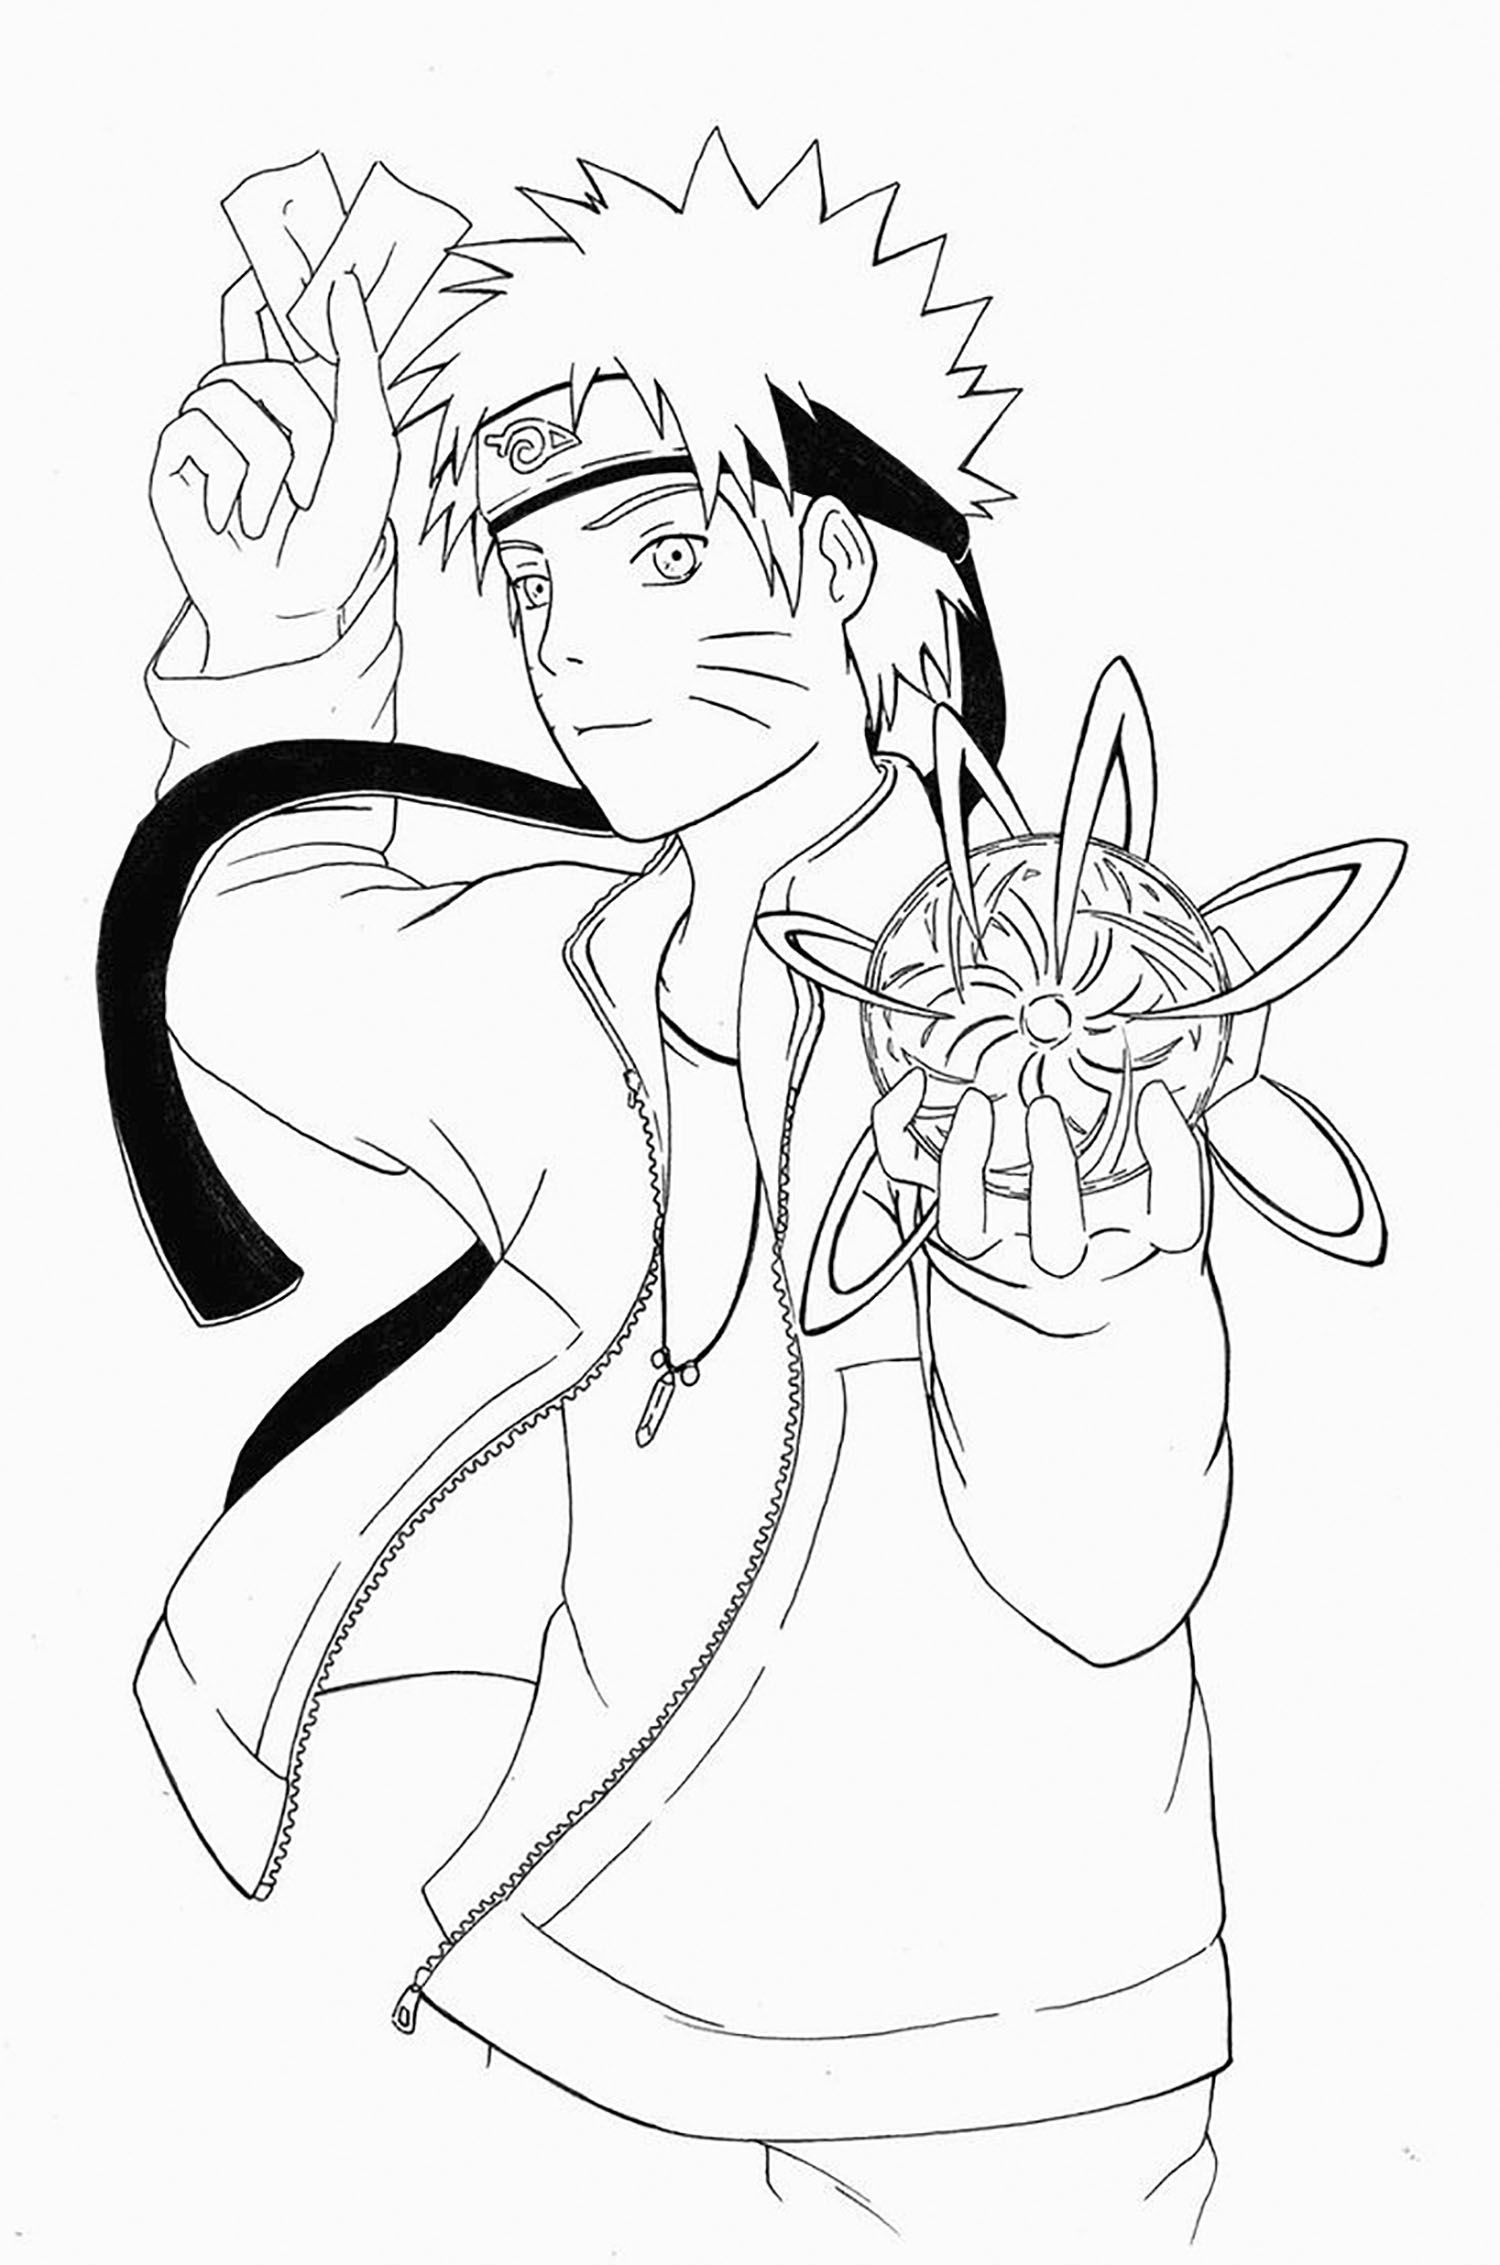 Download Naruto to download for free - Naruto Kids Coloring Pages